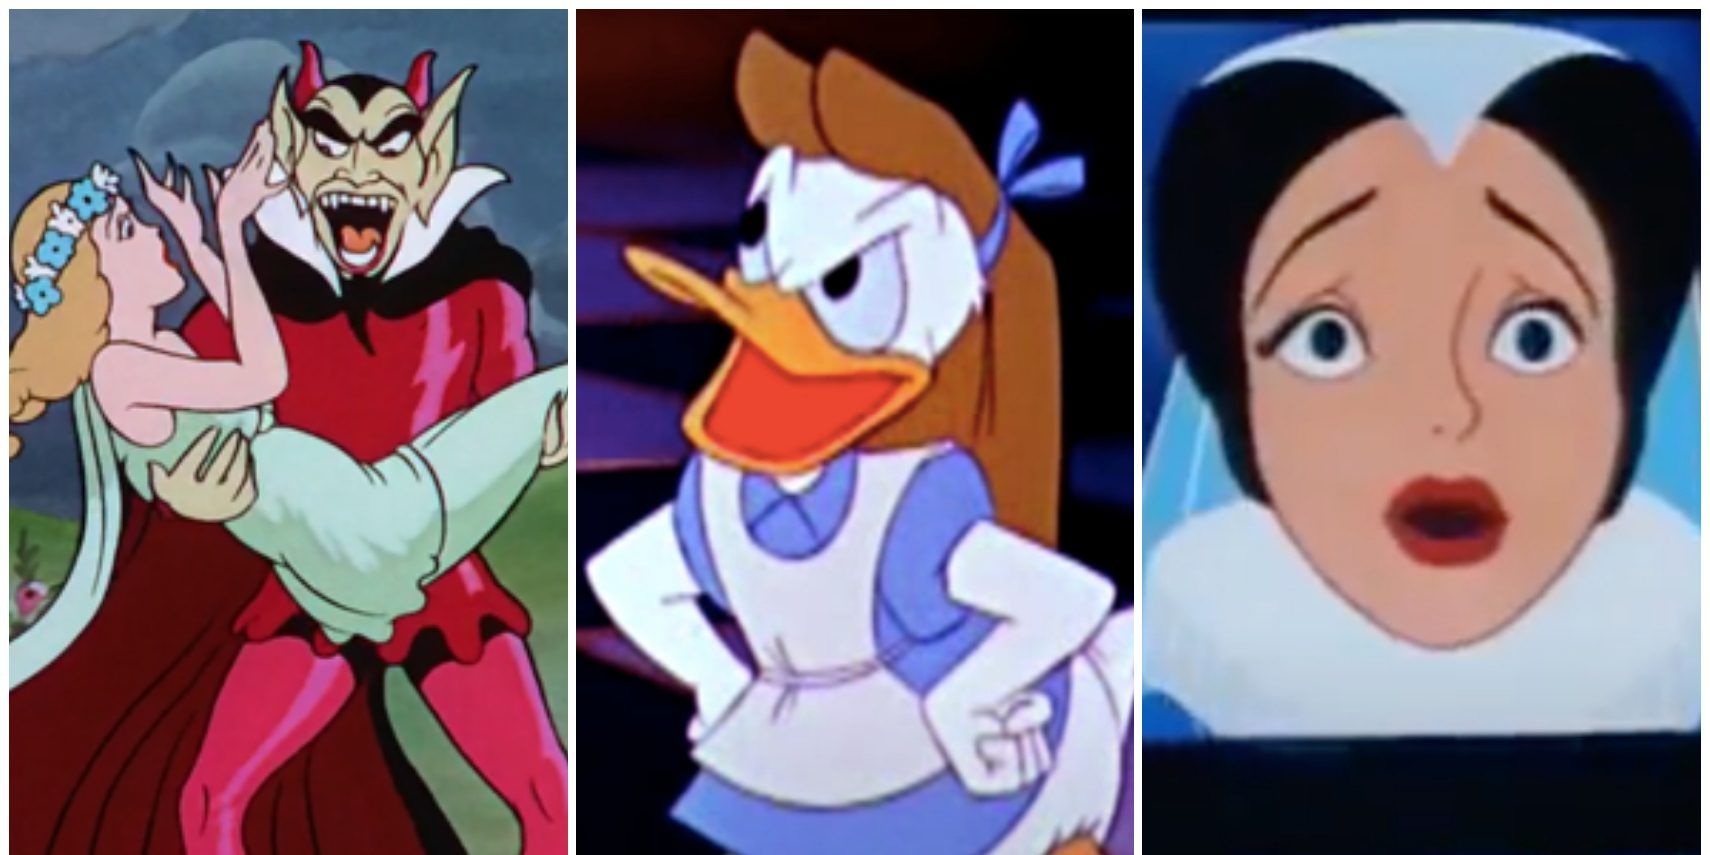 10 Disney Cartoons That Were Way Ahead Of Their Time